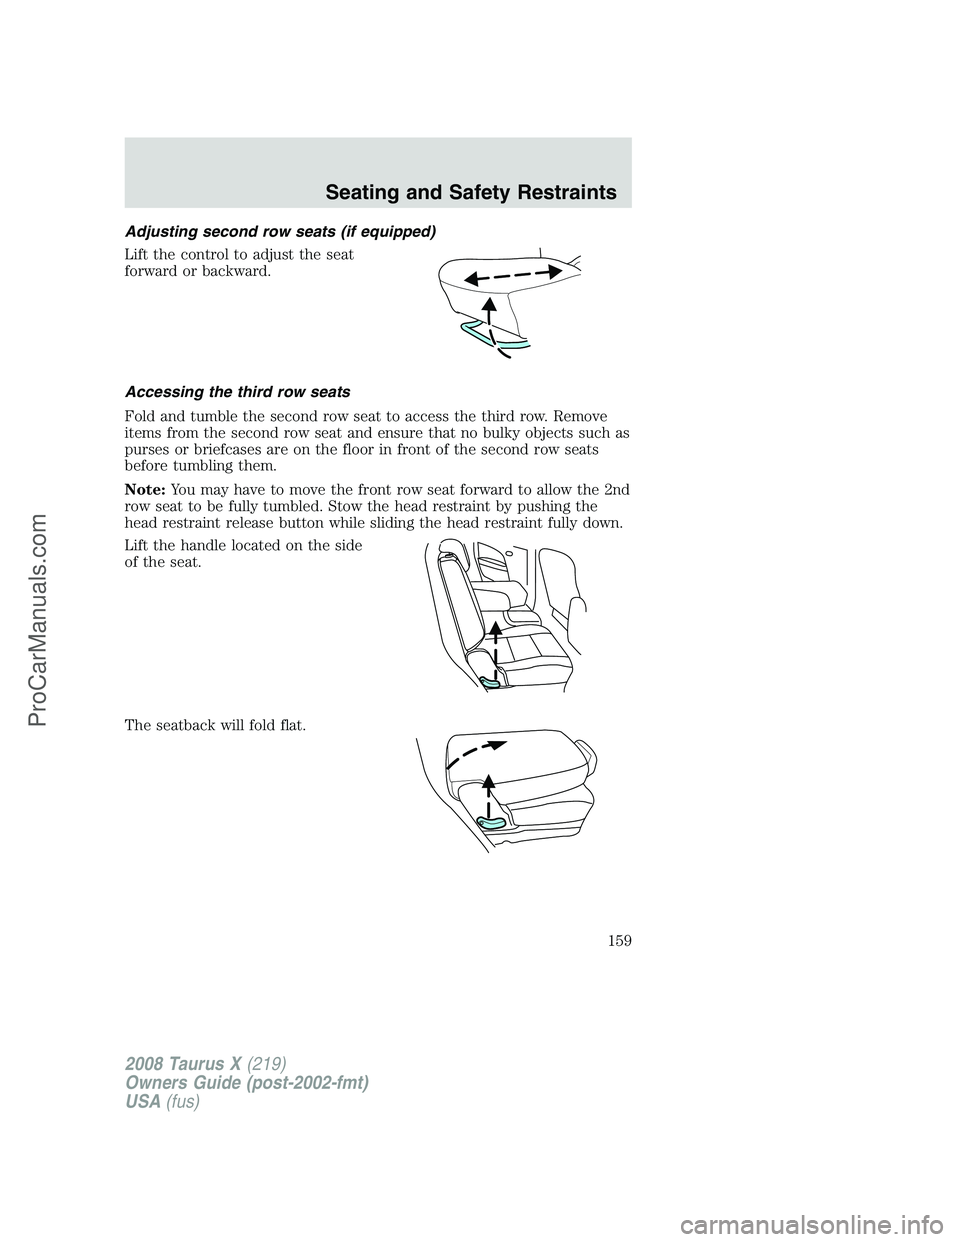 FORD FREESTYLE 2008  Owners Manual Adjusting second row seats (if equipped)
Lift the control to adjust the seat
forward or backward.
Accessing the third row seats
Fold and tumble the second row seat to access the third row. Remove
item